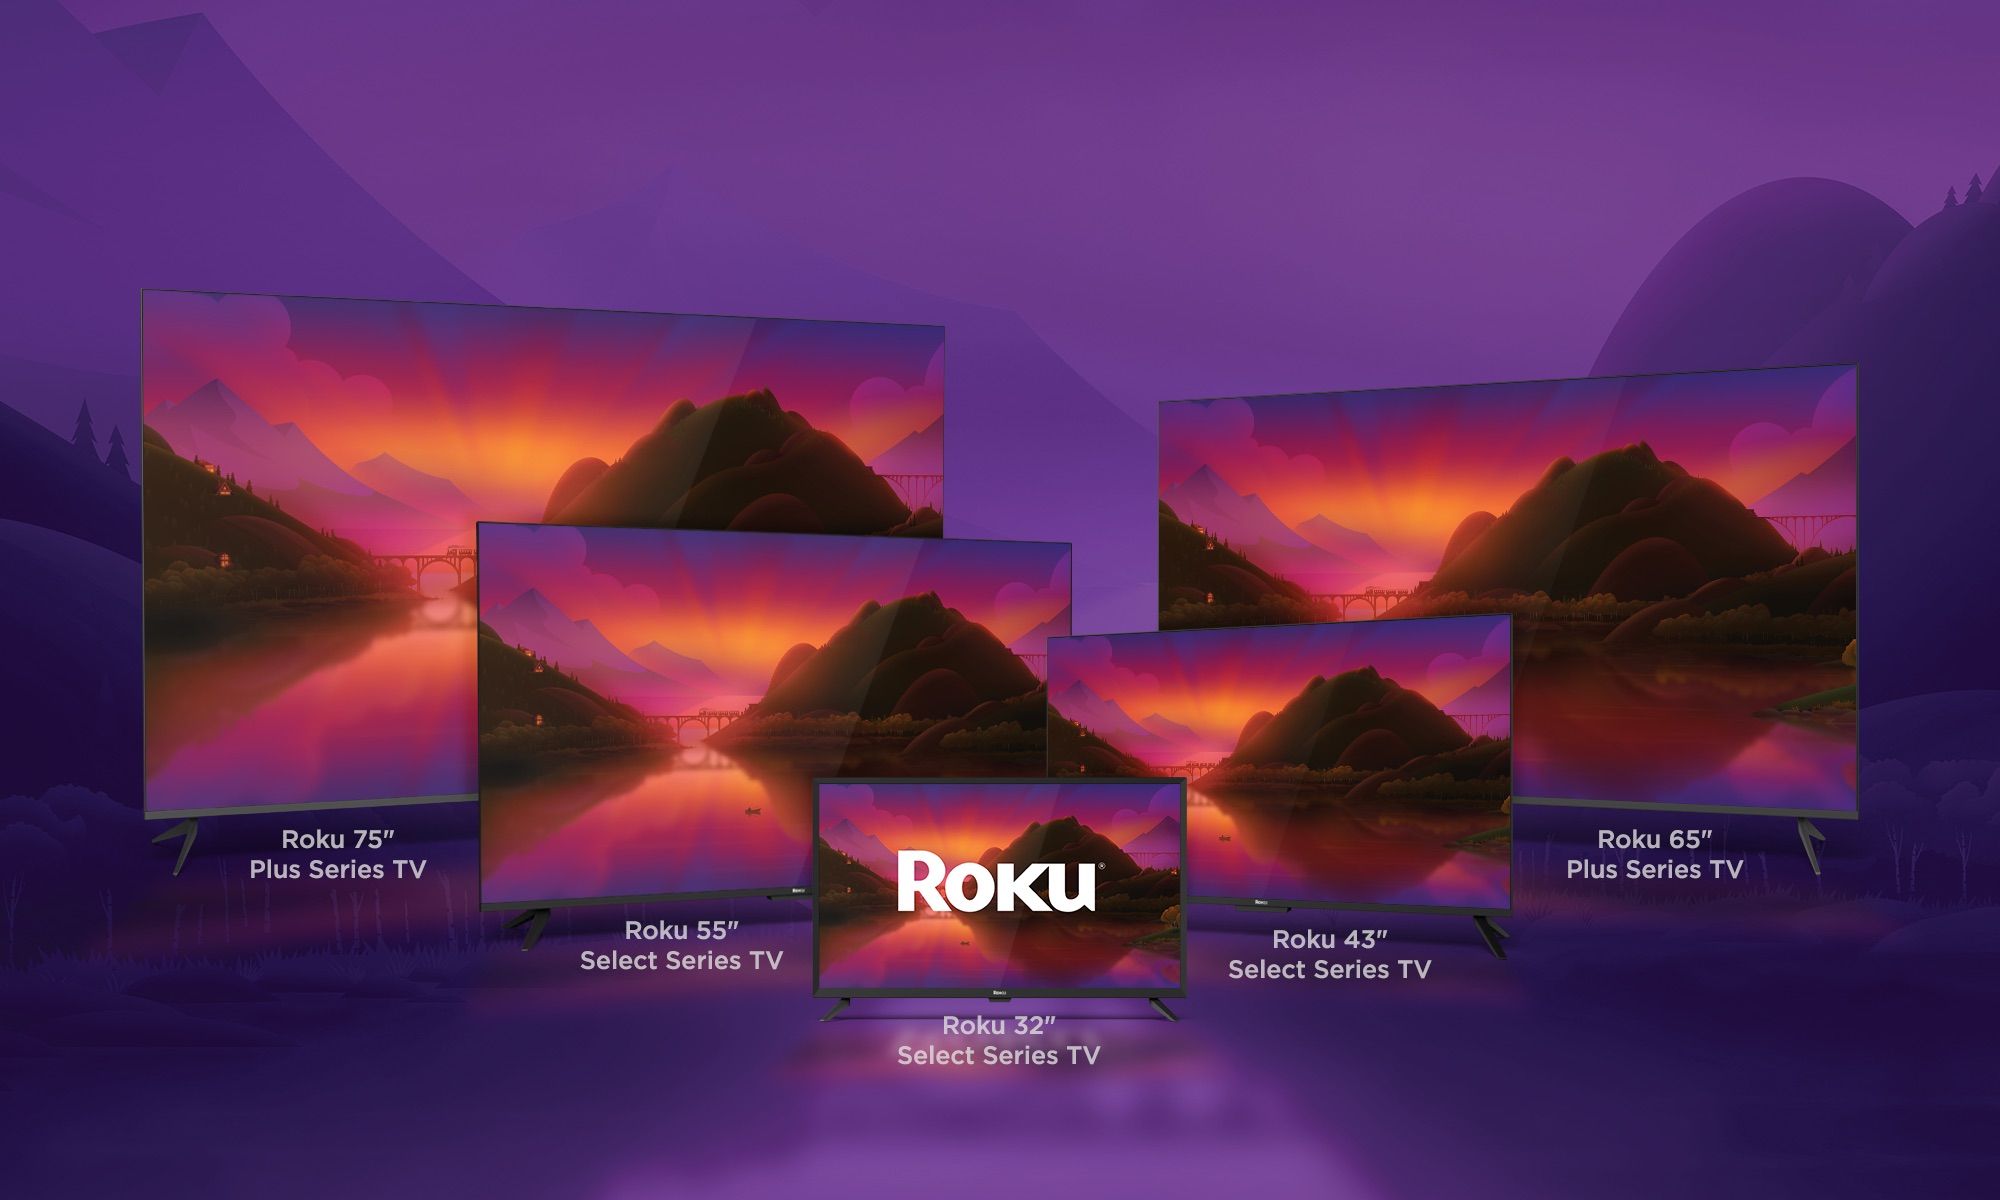 The Roku TV lineup with five different TVs of varying sizes